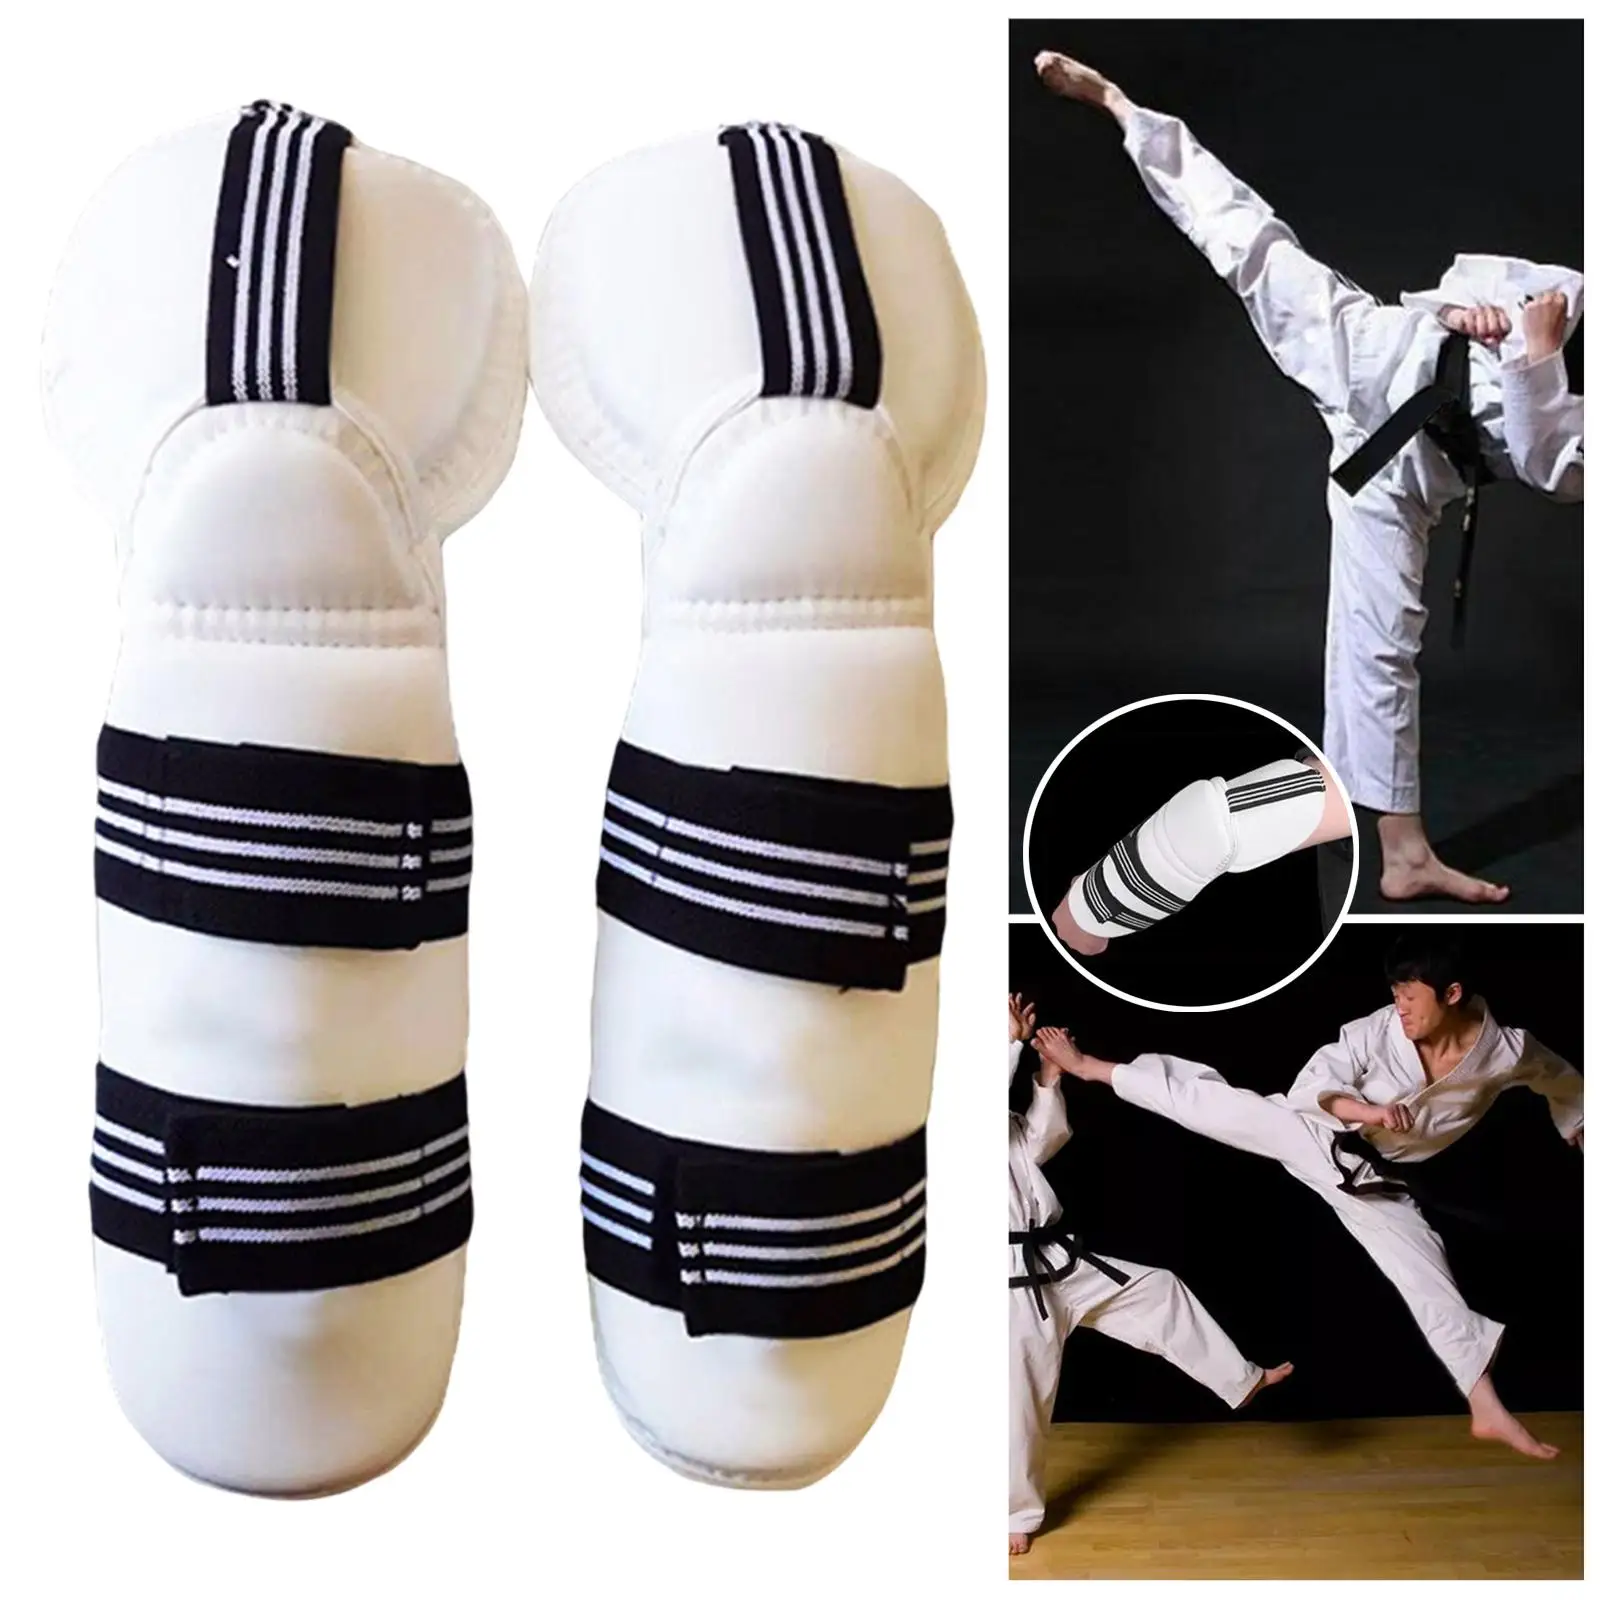 Taekwondo Guard Protective Gear with Adjustable Elastic Strap, Protection Padded Guard for Sanda, Match, MMA Fighting